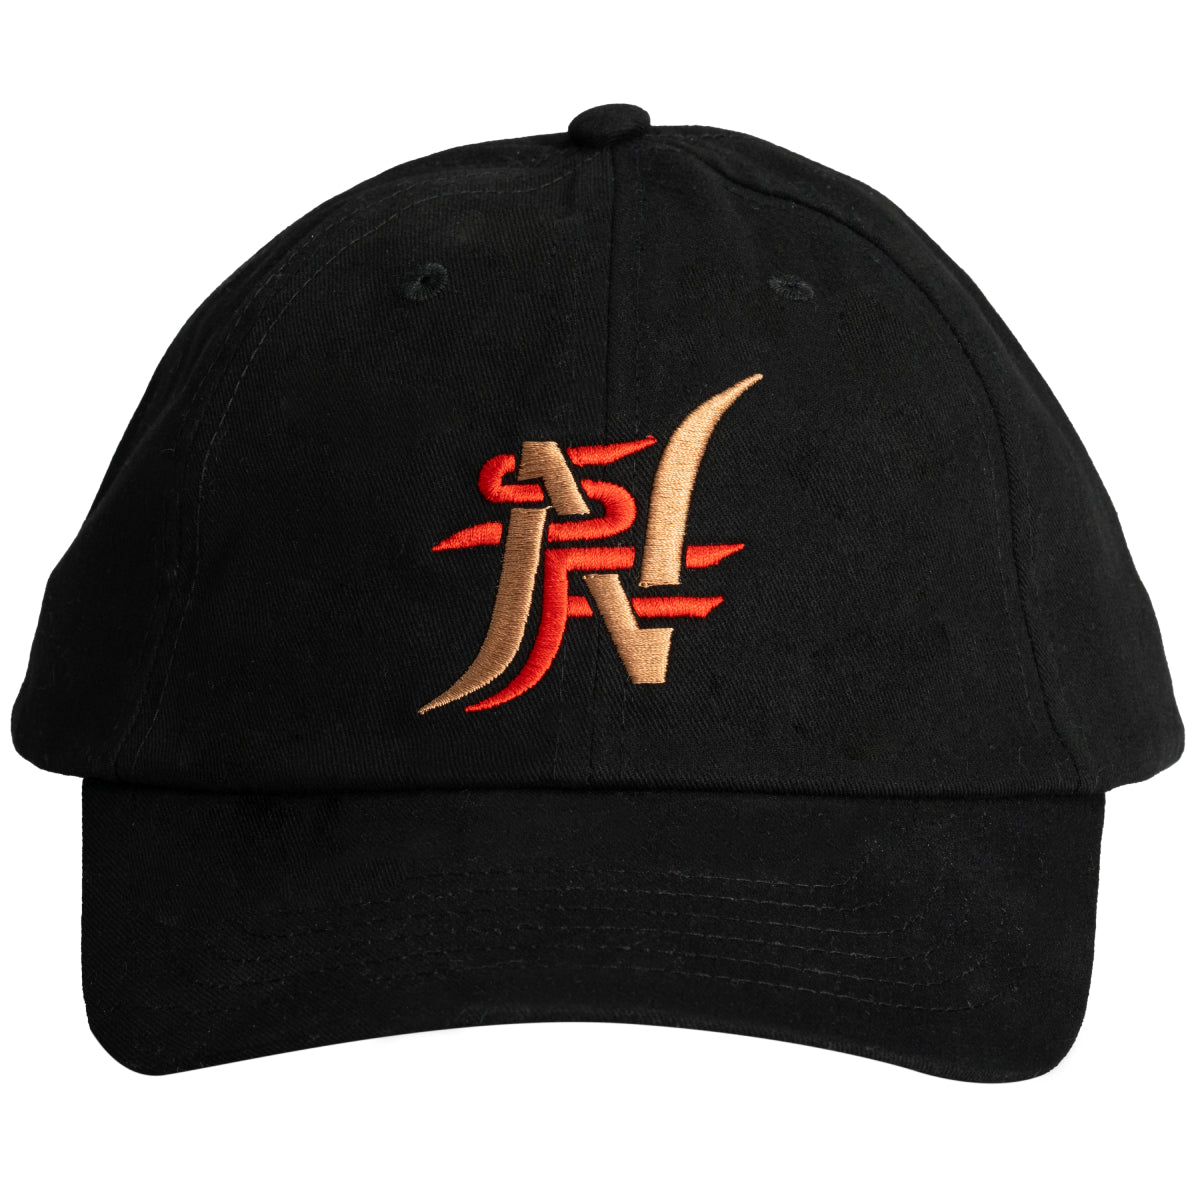 Big Hero 6 Tadashi Hats Black Baseball Caps in Different Styles and Sizes for Fans